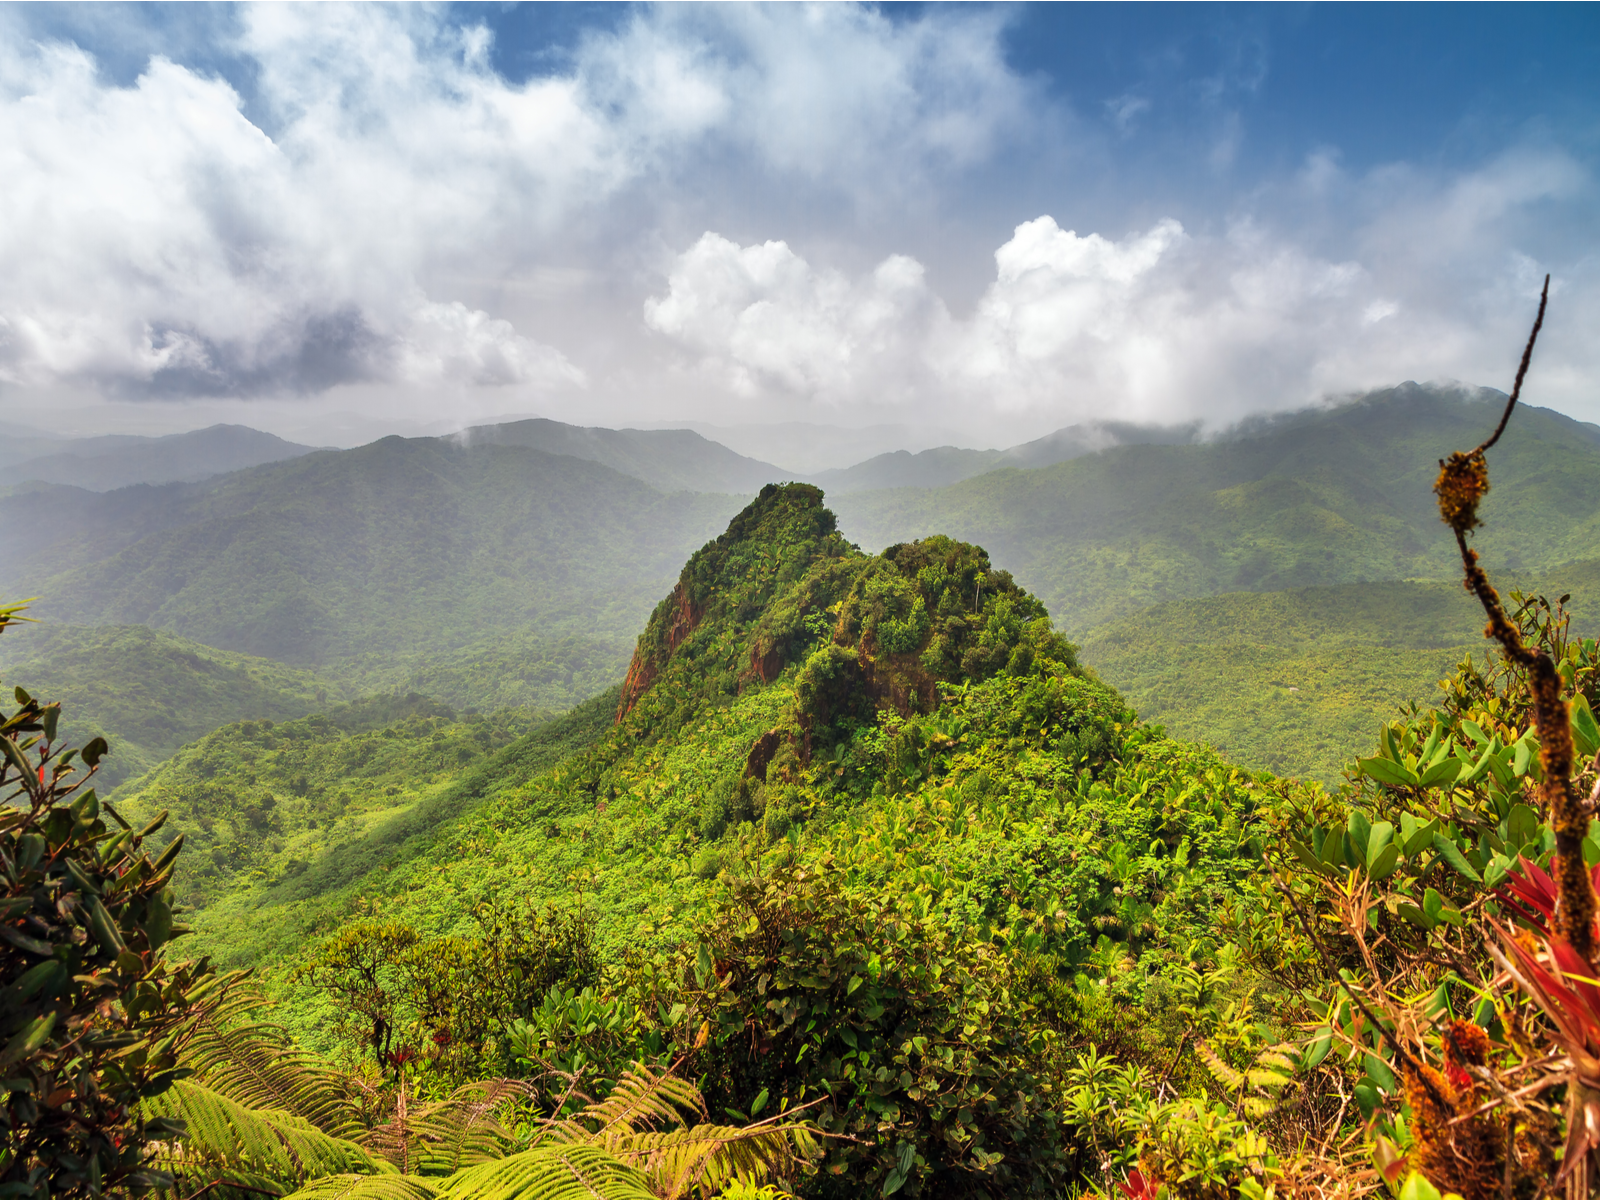 Clouds hovering over the lush hills at El Yunque National Rainforest, a piece on the best places to visit in Puerto Rico